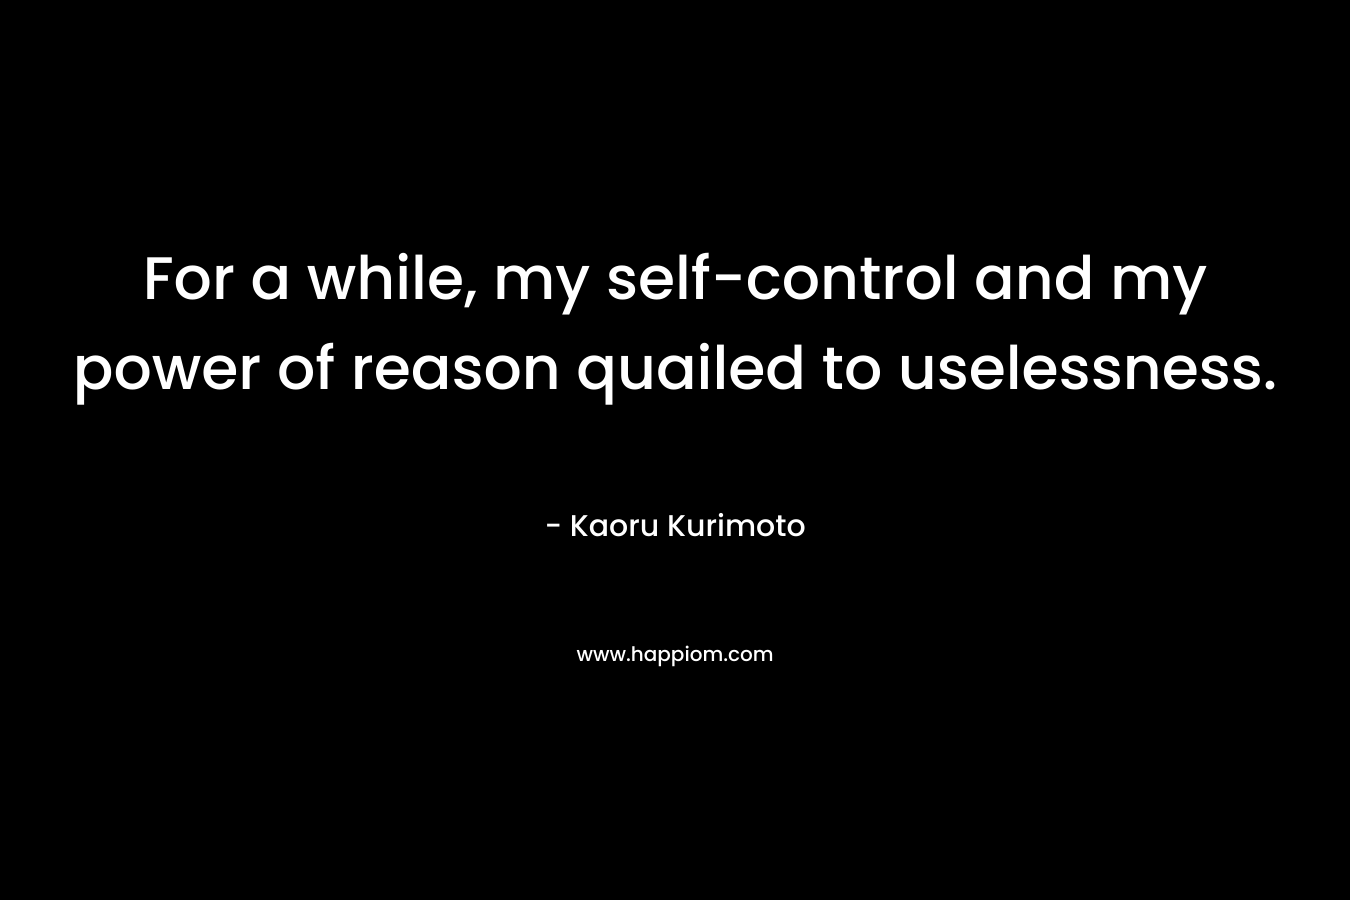 For a while, my self-control and my power of reason quailed to uselessness.